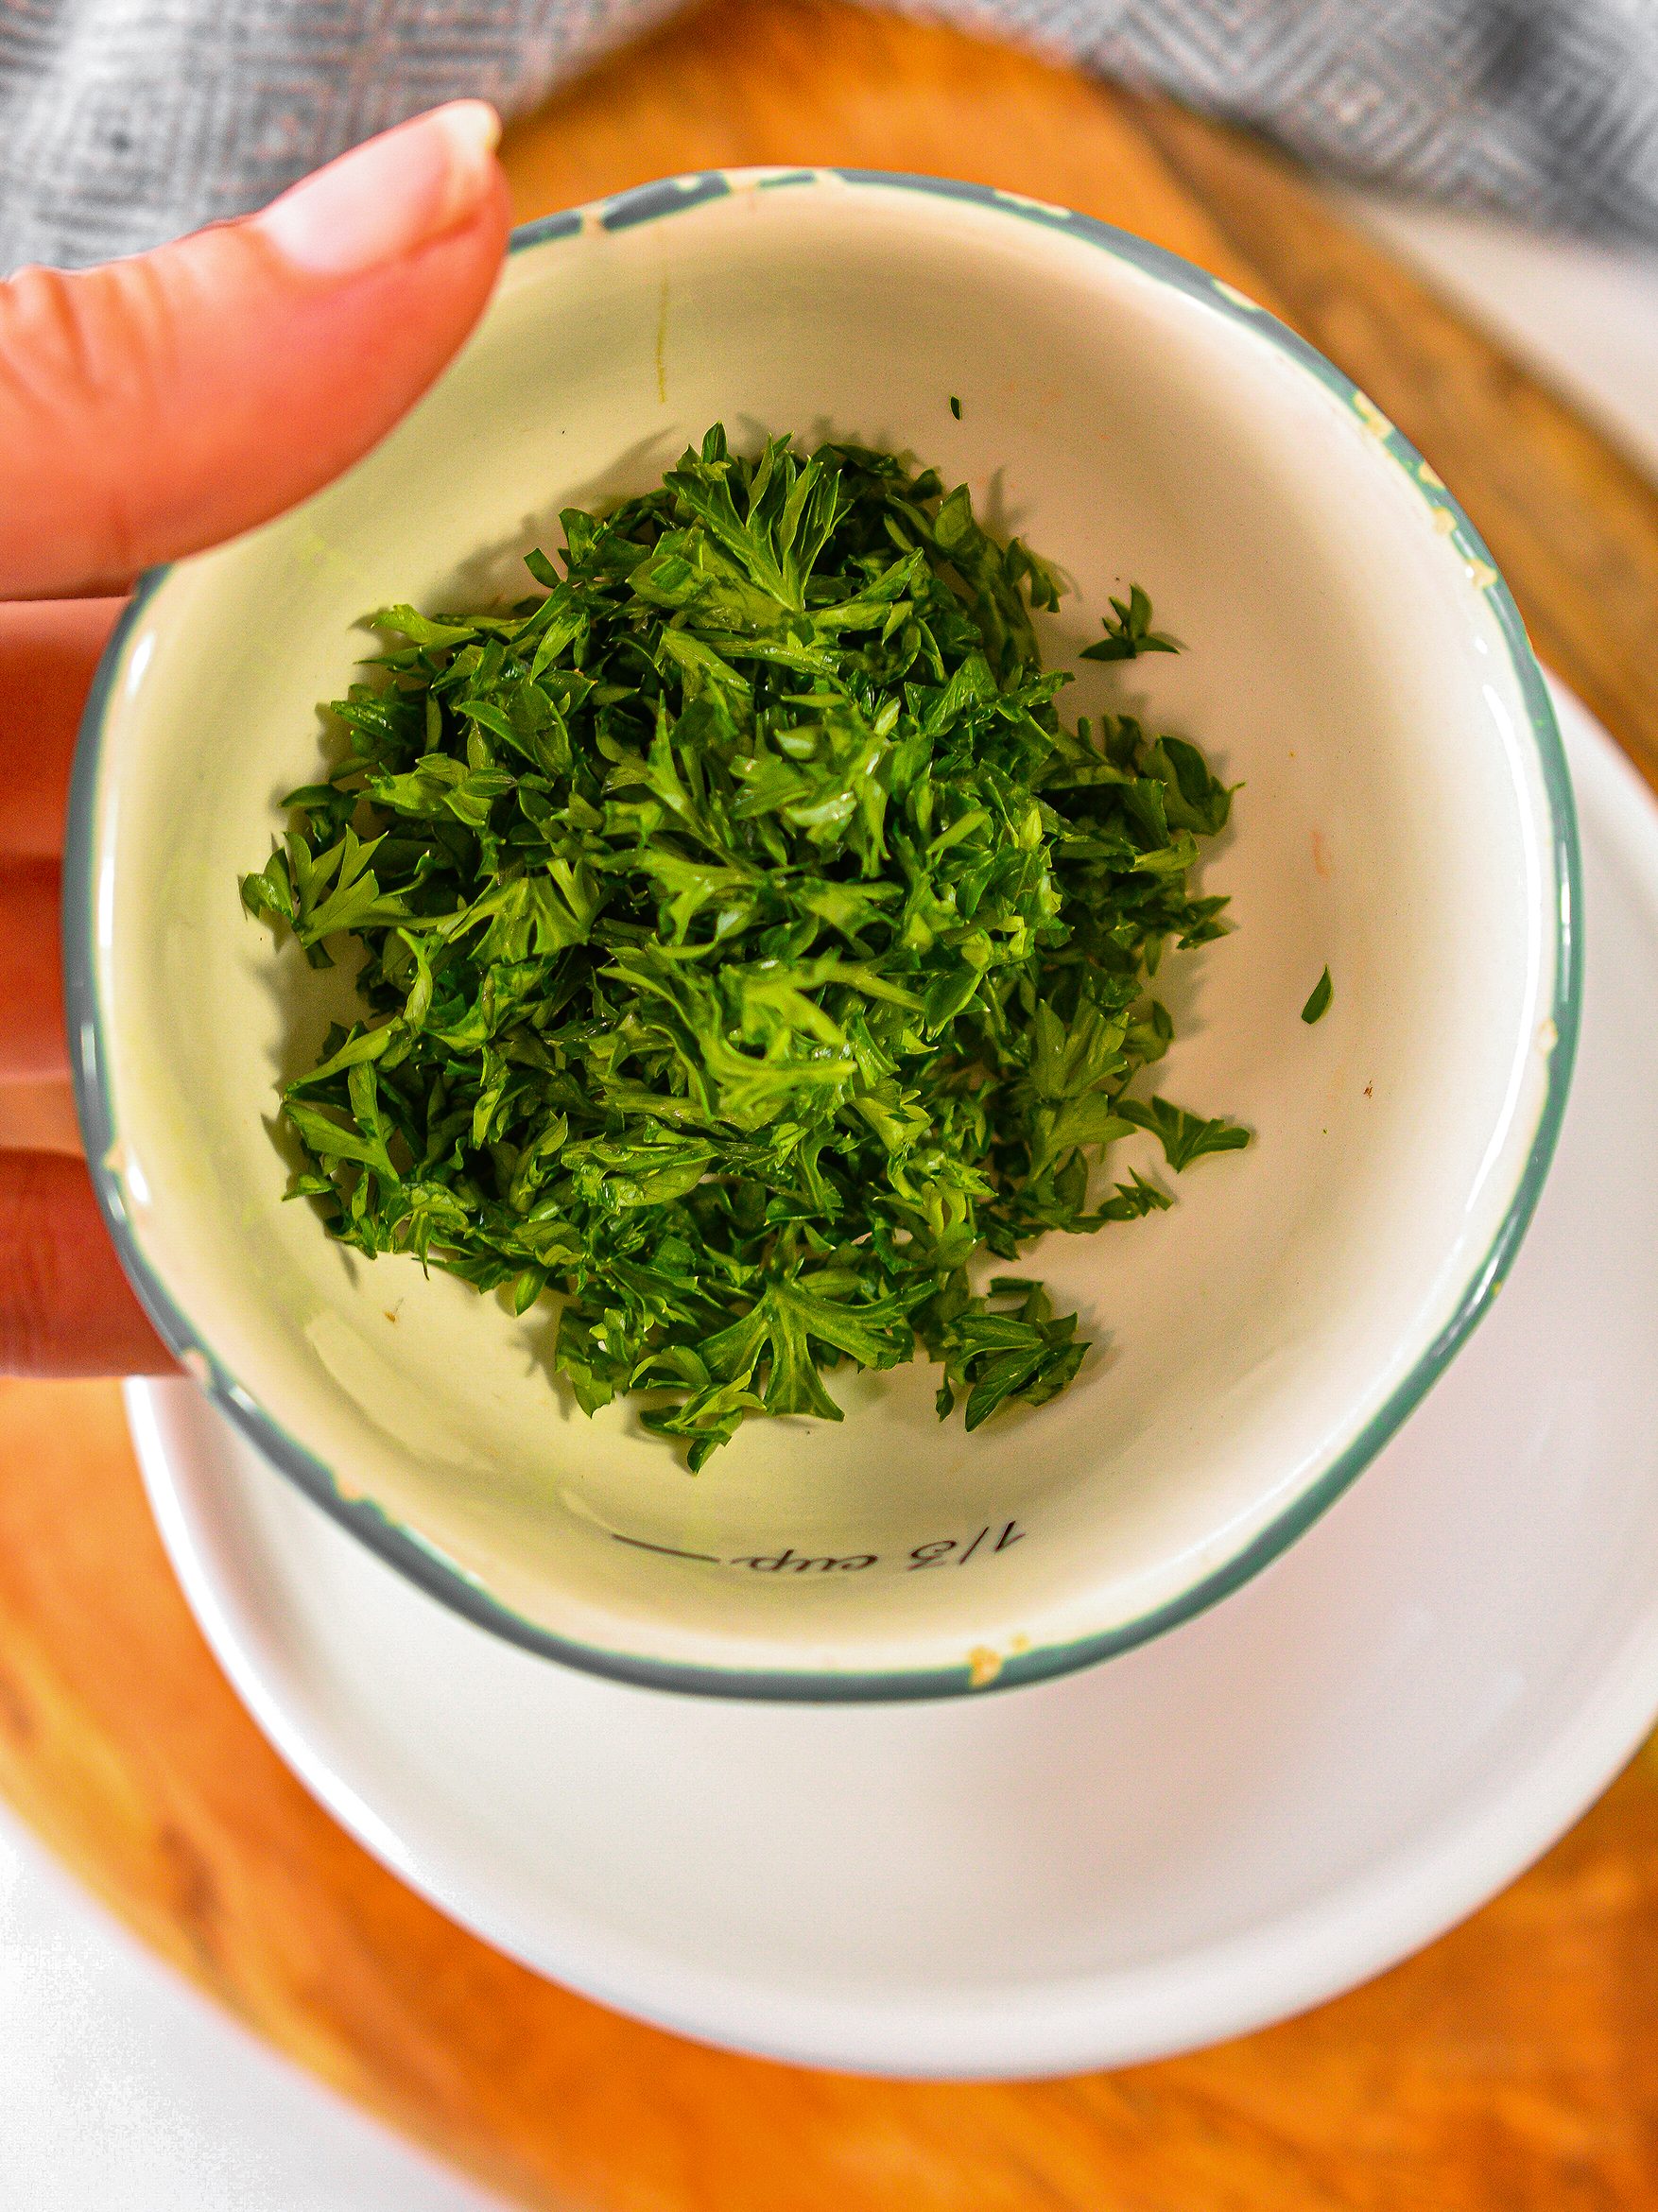 In a bowl, combine the parsley, mustard, garlic, salt, pepper, lemon juice and olive oil until well combined.